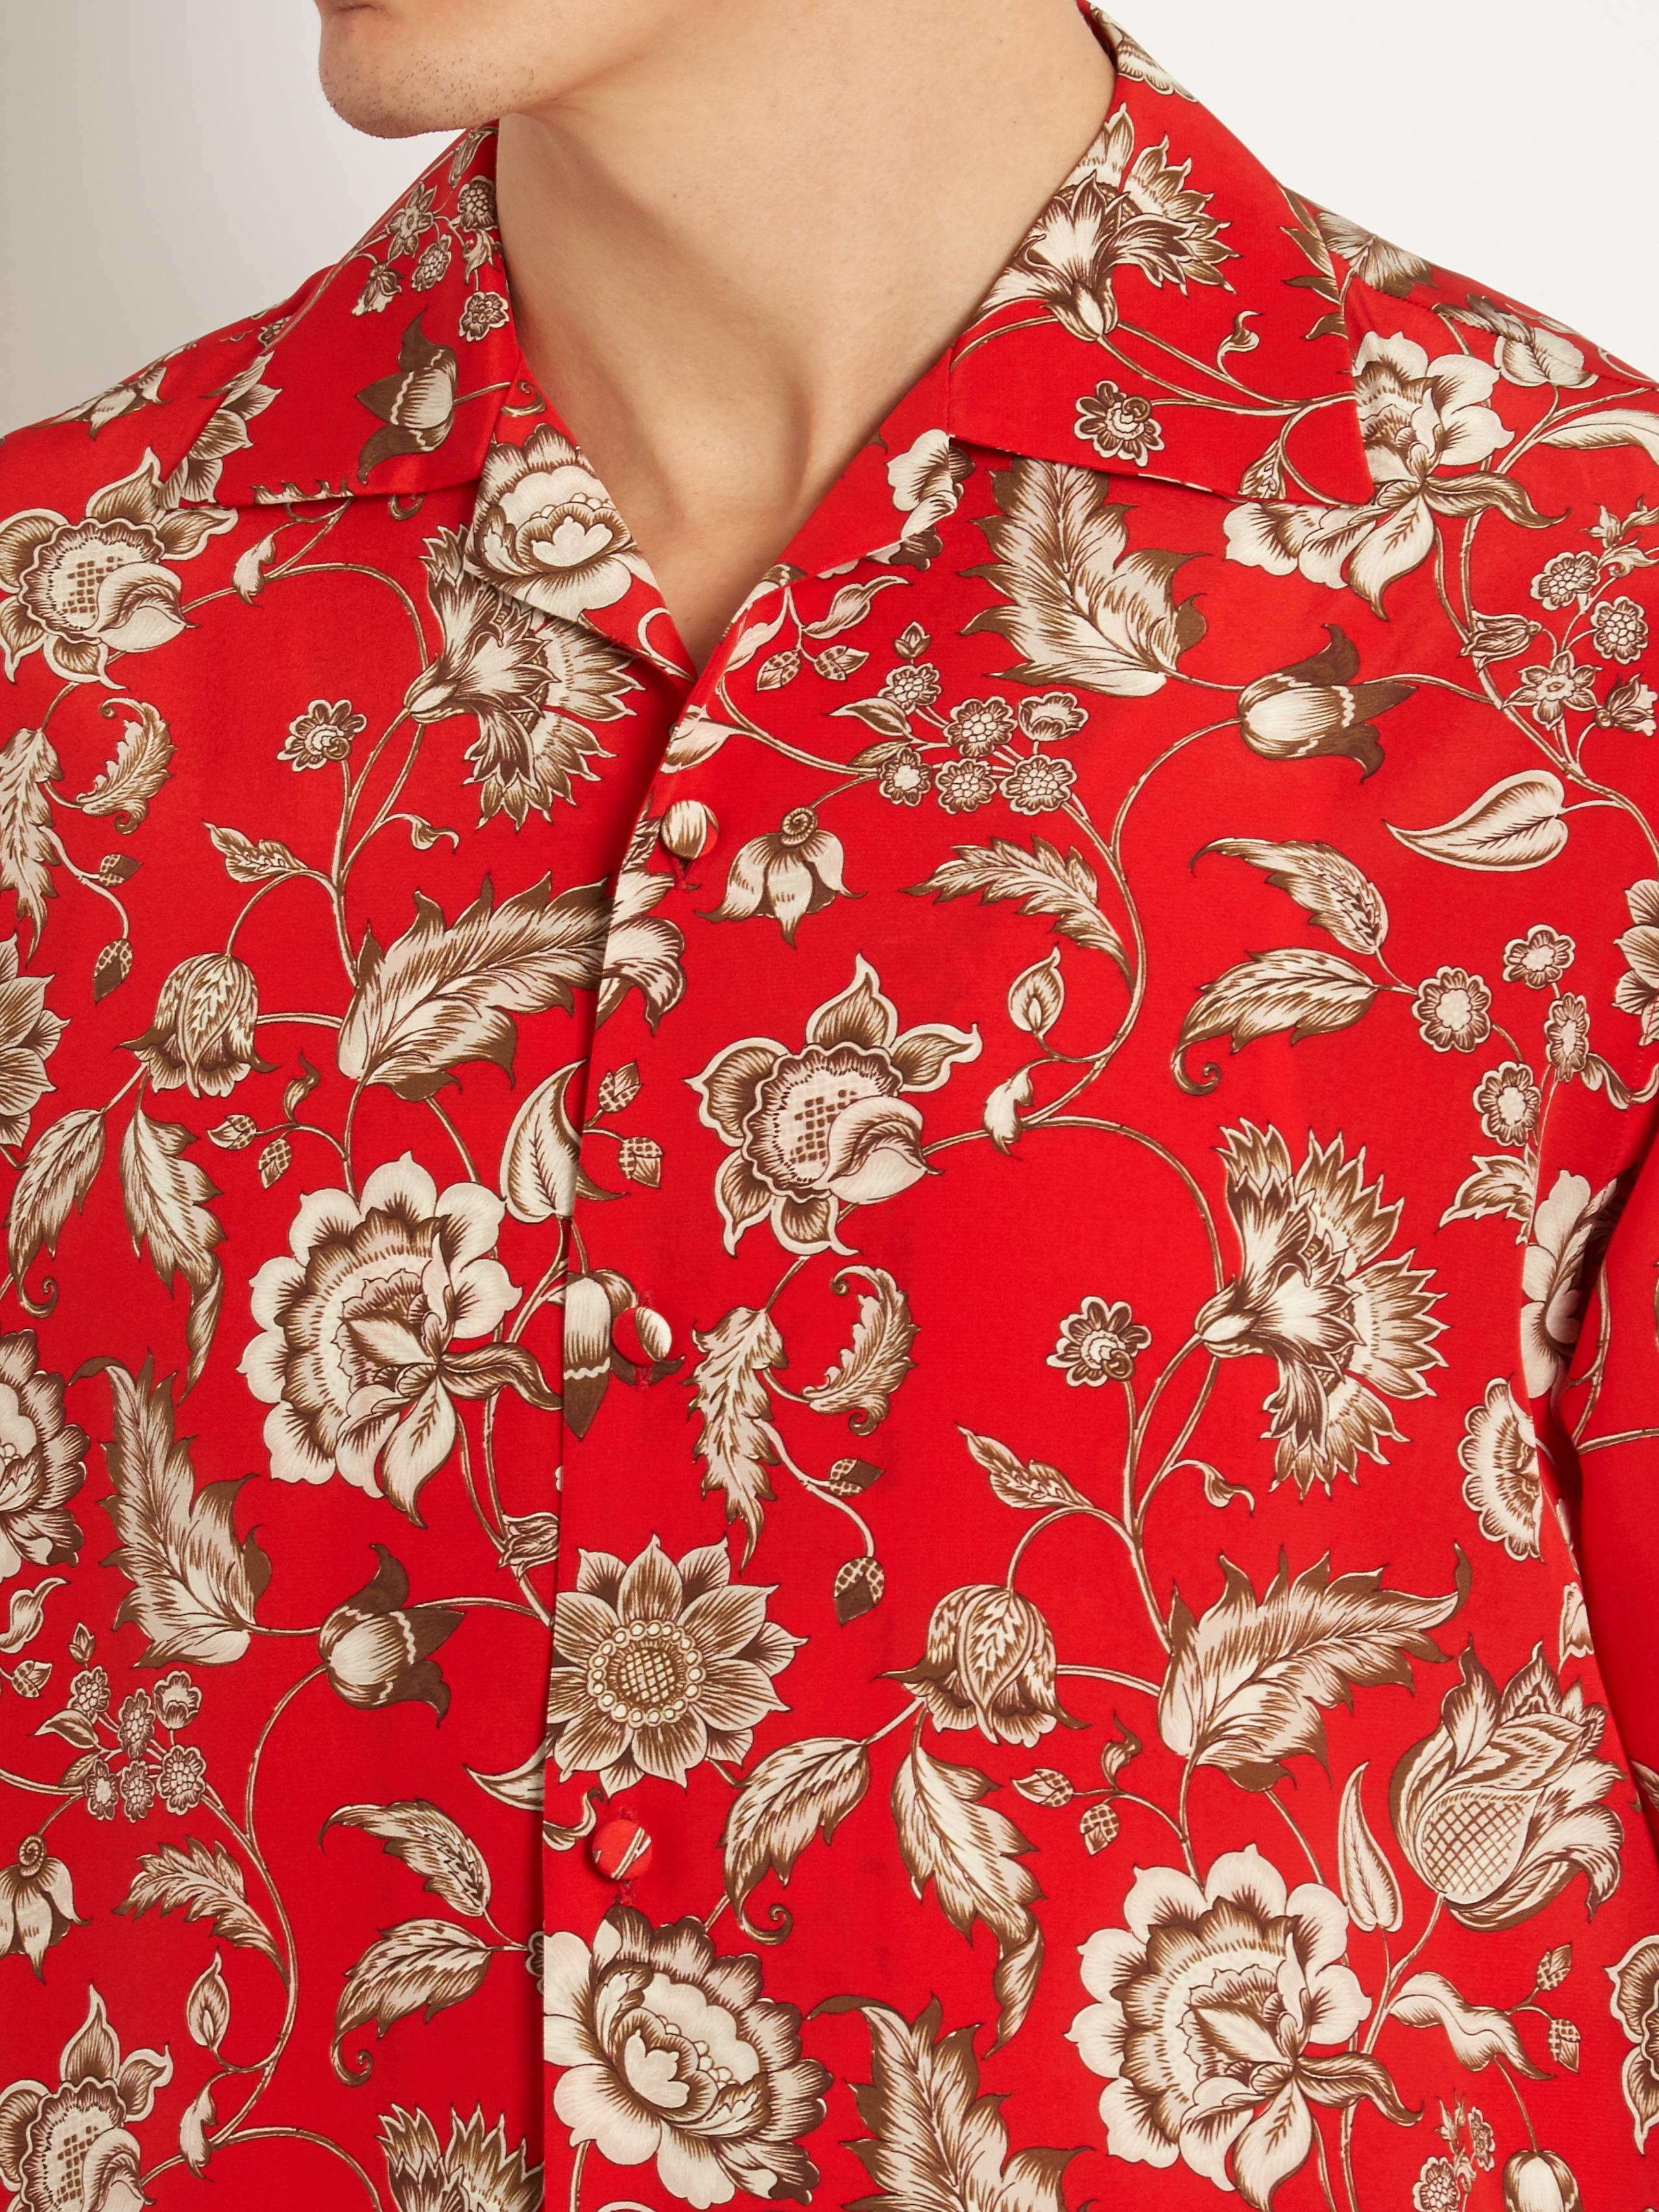 Gucci Camp-collar Floral-print Silk Shirt in Red for Men - Lyst